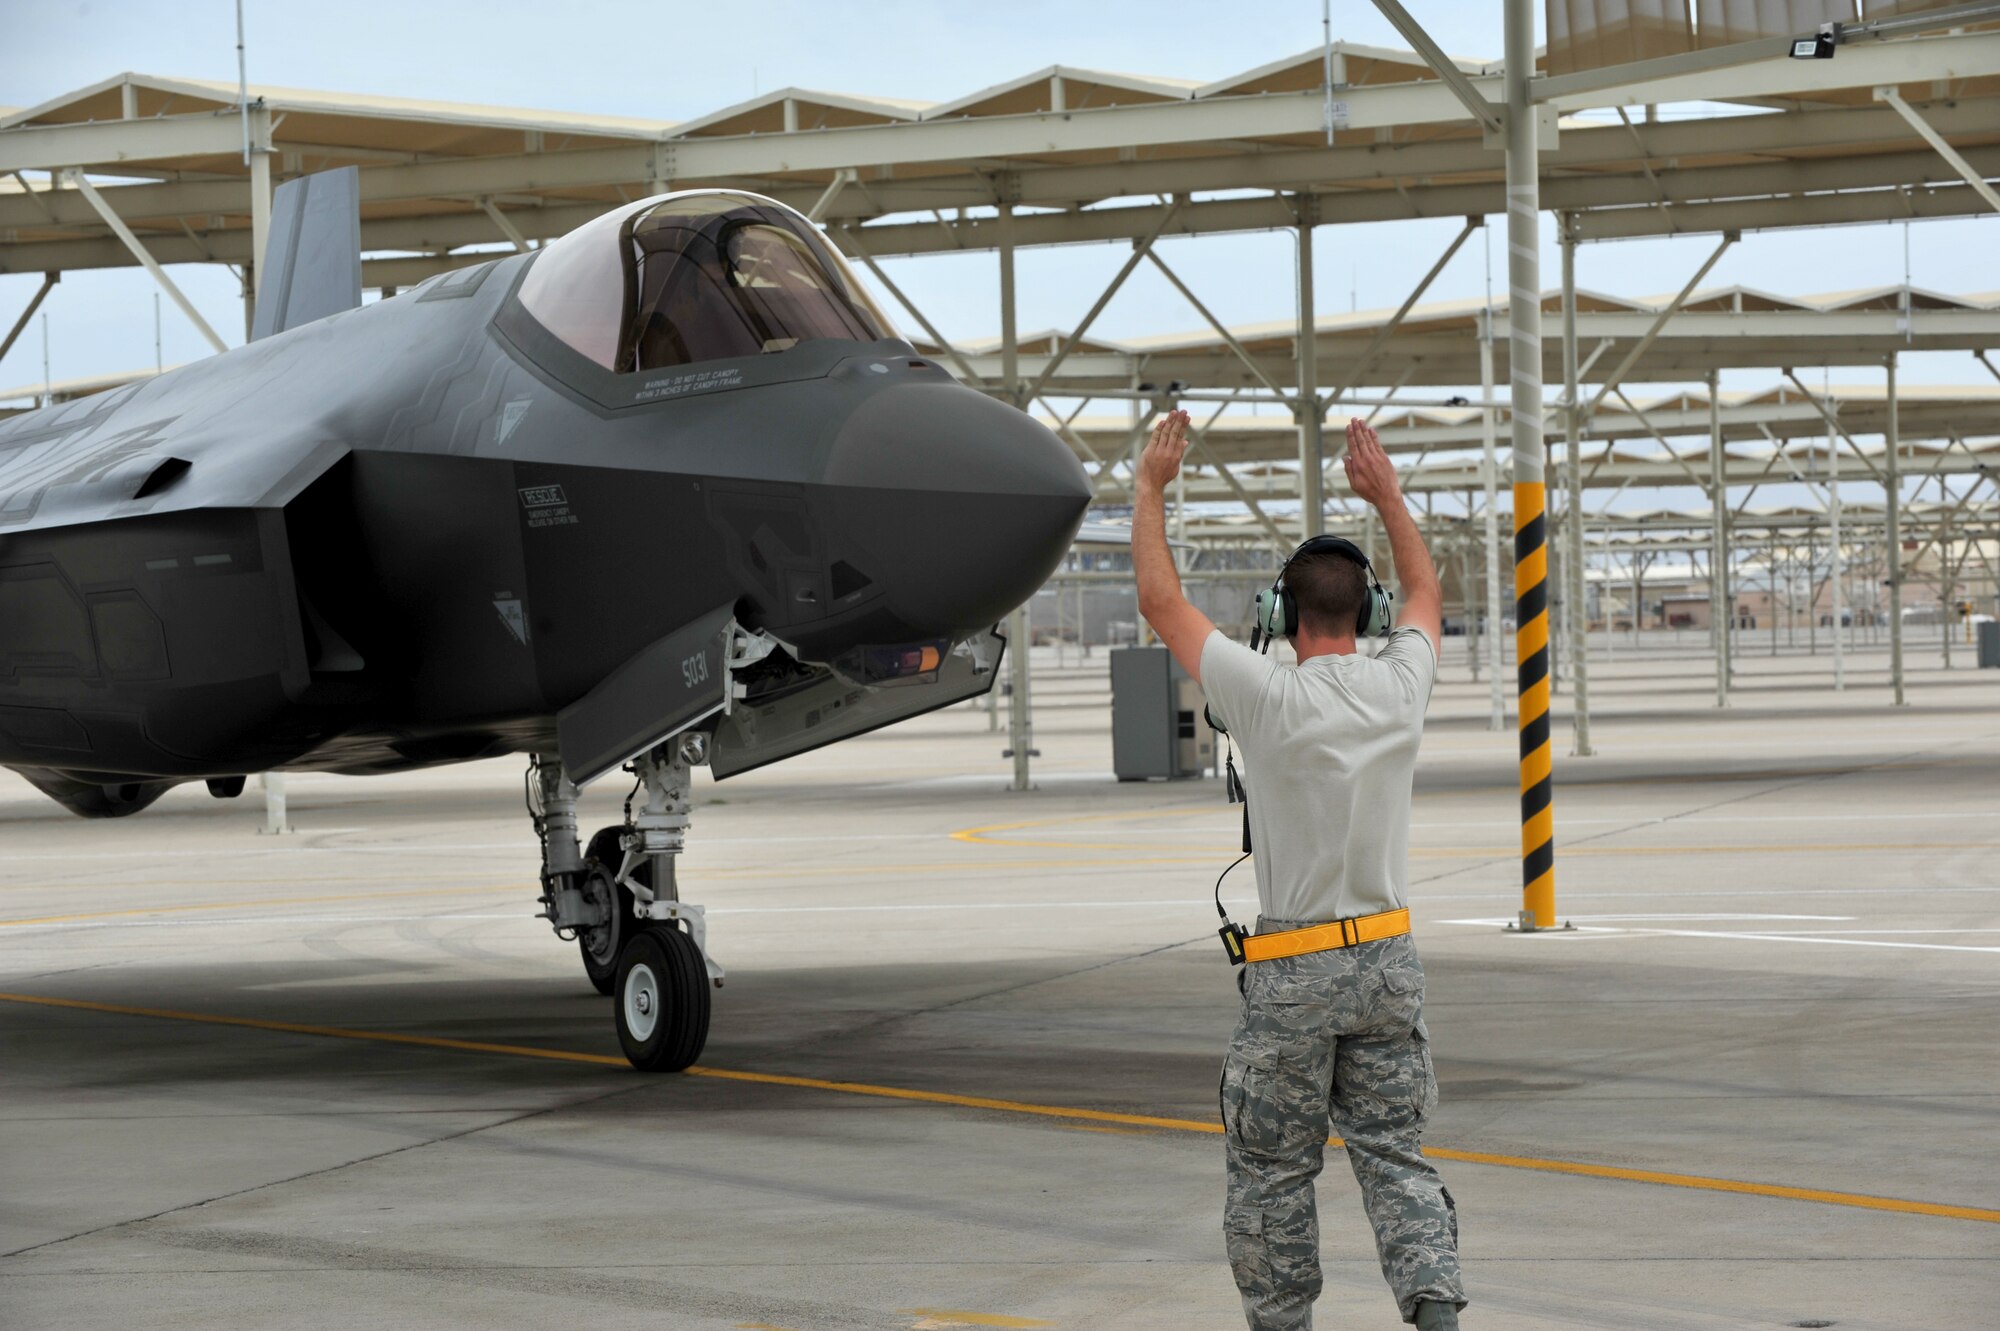 Senior Airman Paul Swanson, 61st Aircraft Maintenance Unit crew chief, marshals in one of Luke Air Force Base’s F-35 Lightning II after one of its first sorties May 6, 2014. (U.S. Air Force photo by Senior Airman Jason Colbert)